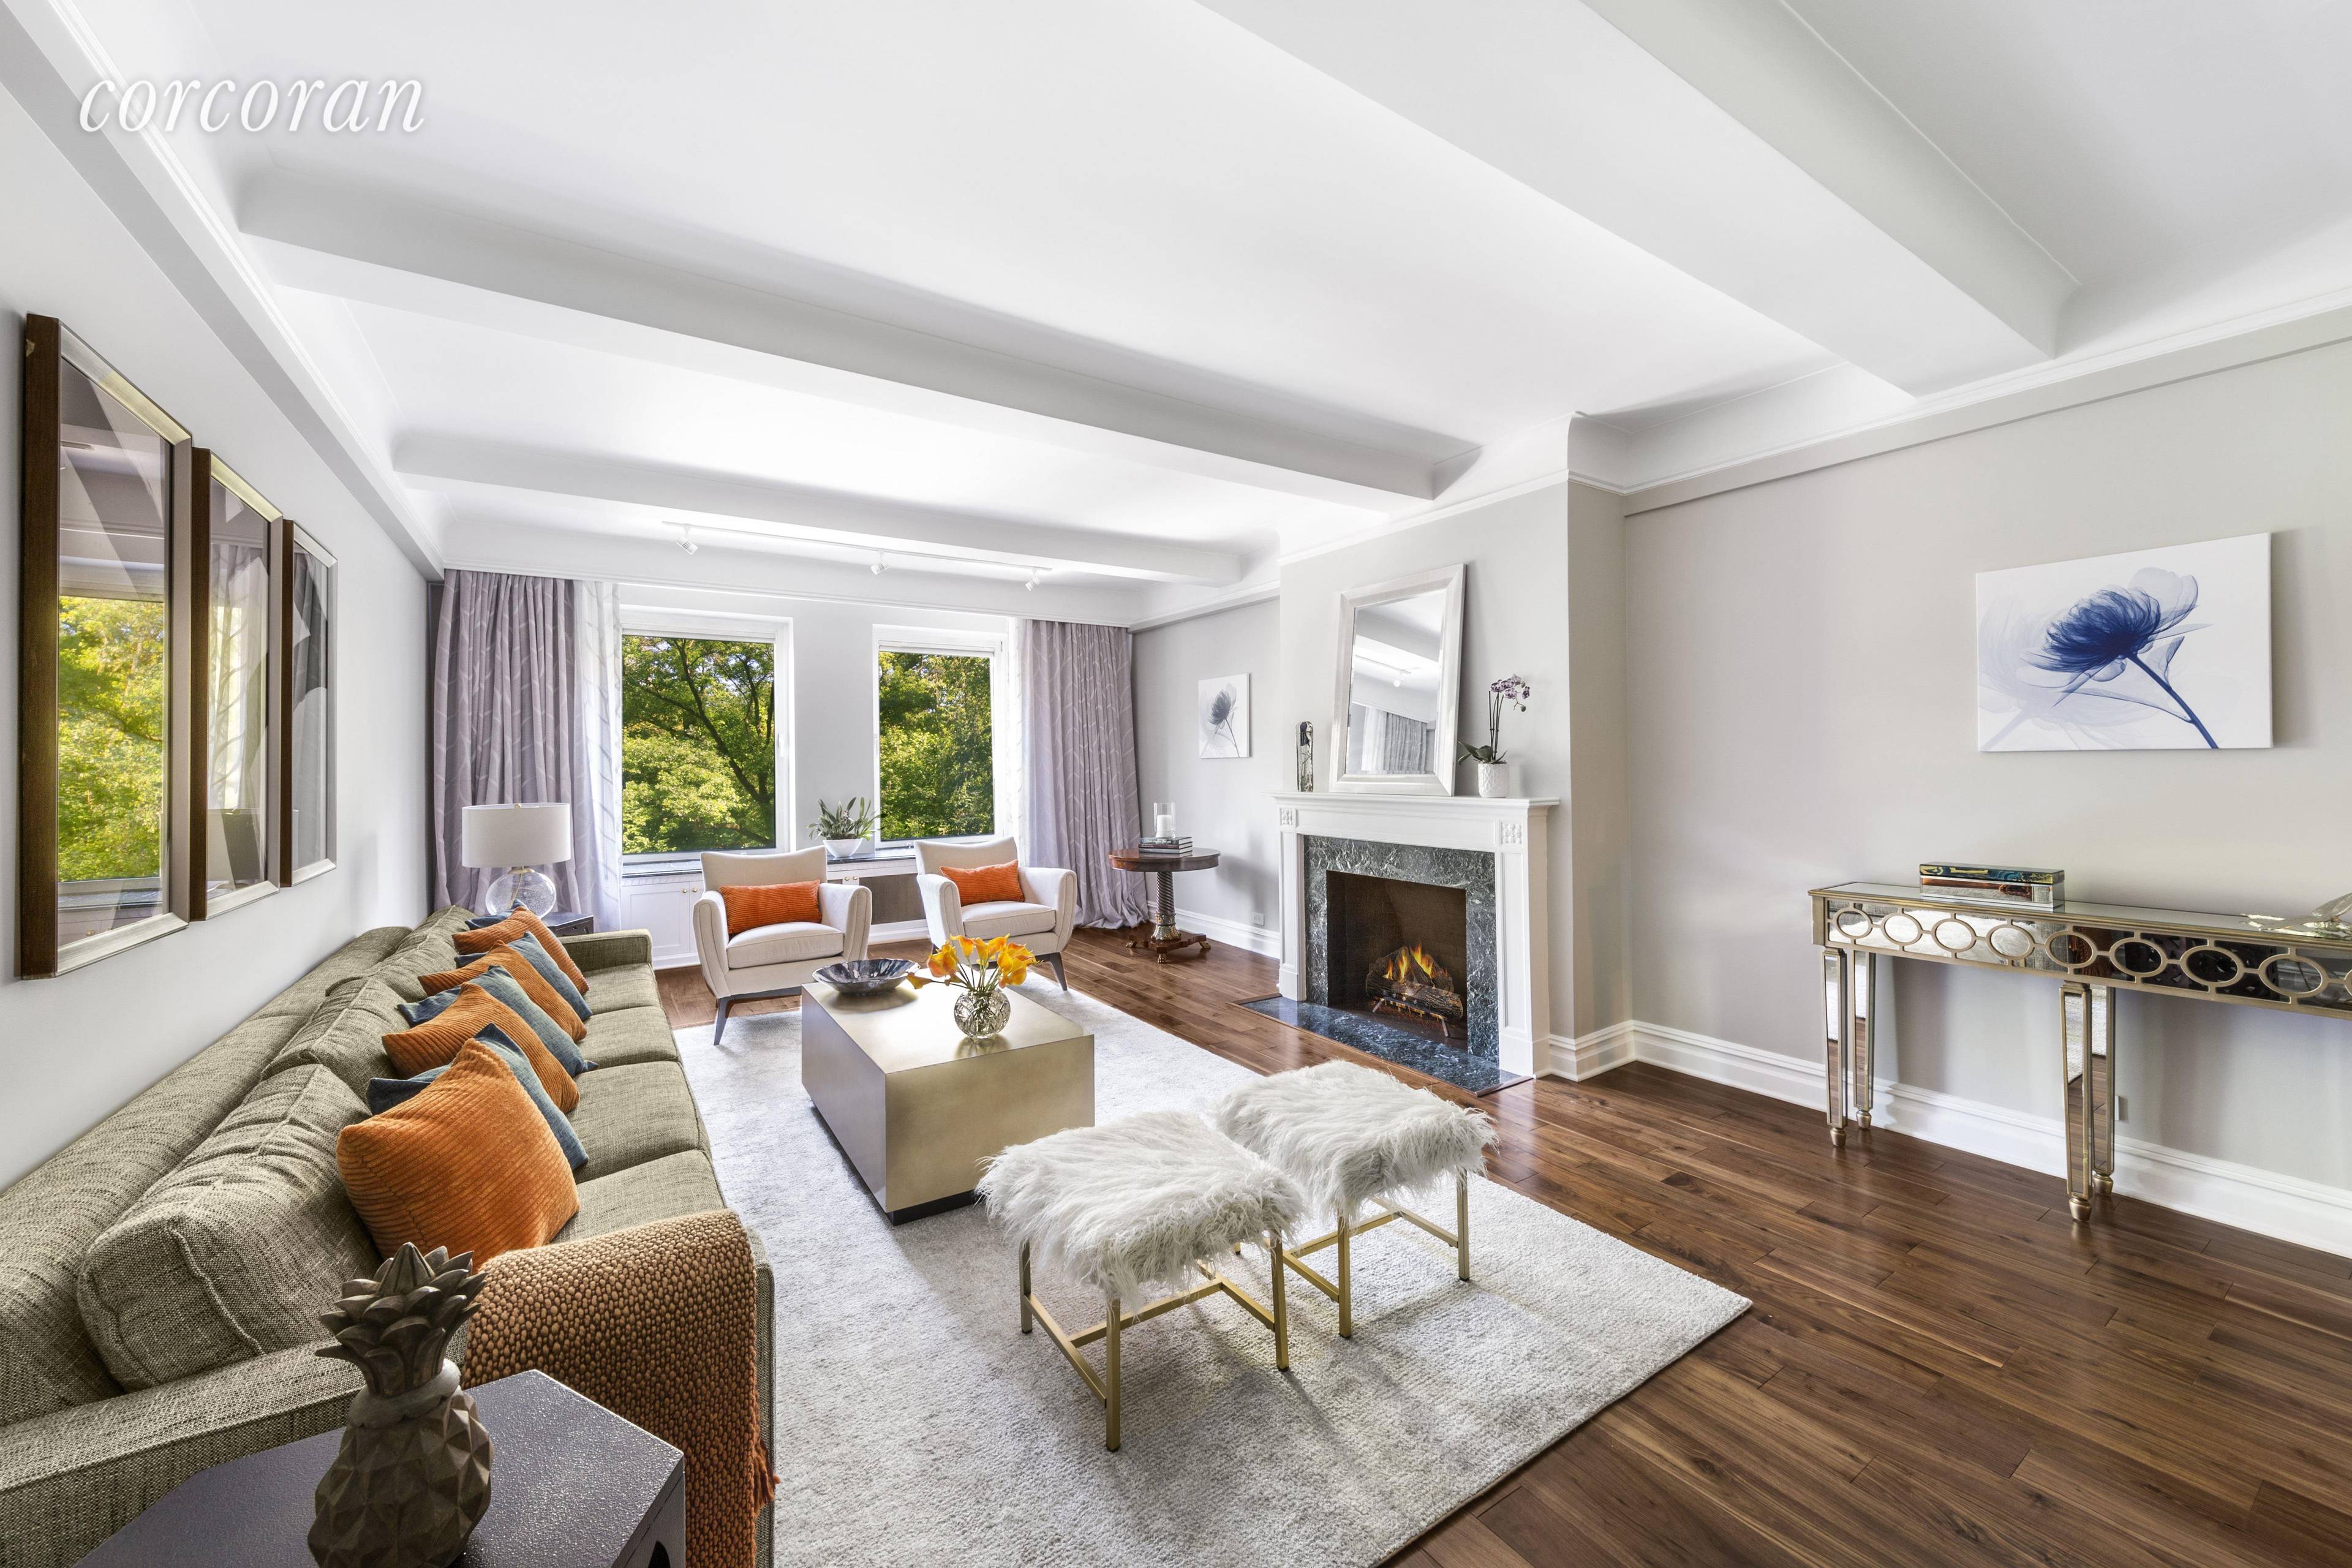 Welcome to Apartment 3B at 322 Central Park West the best priced four bedroom prewar Classic 8 coop on Central Park West with Park views from nearly every window.